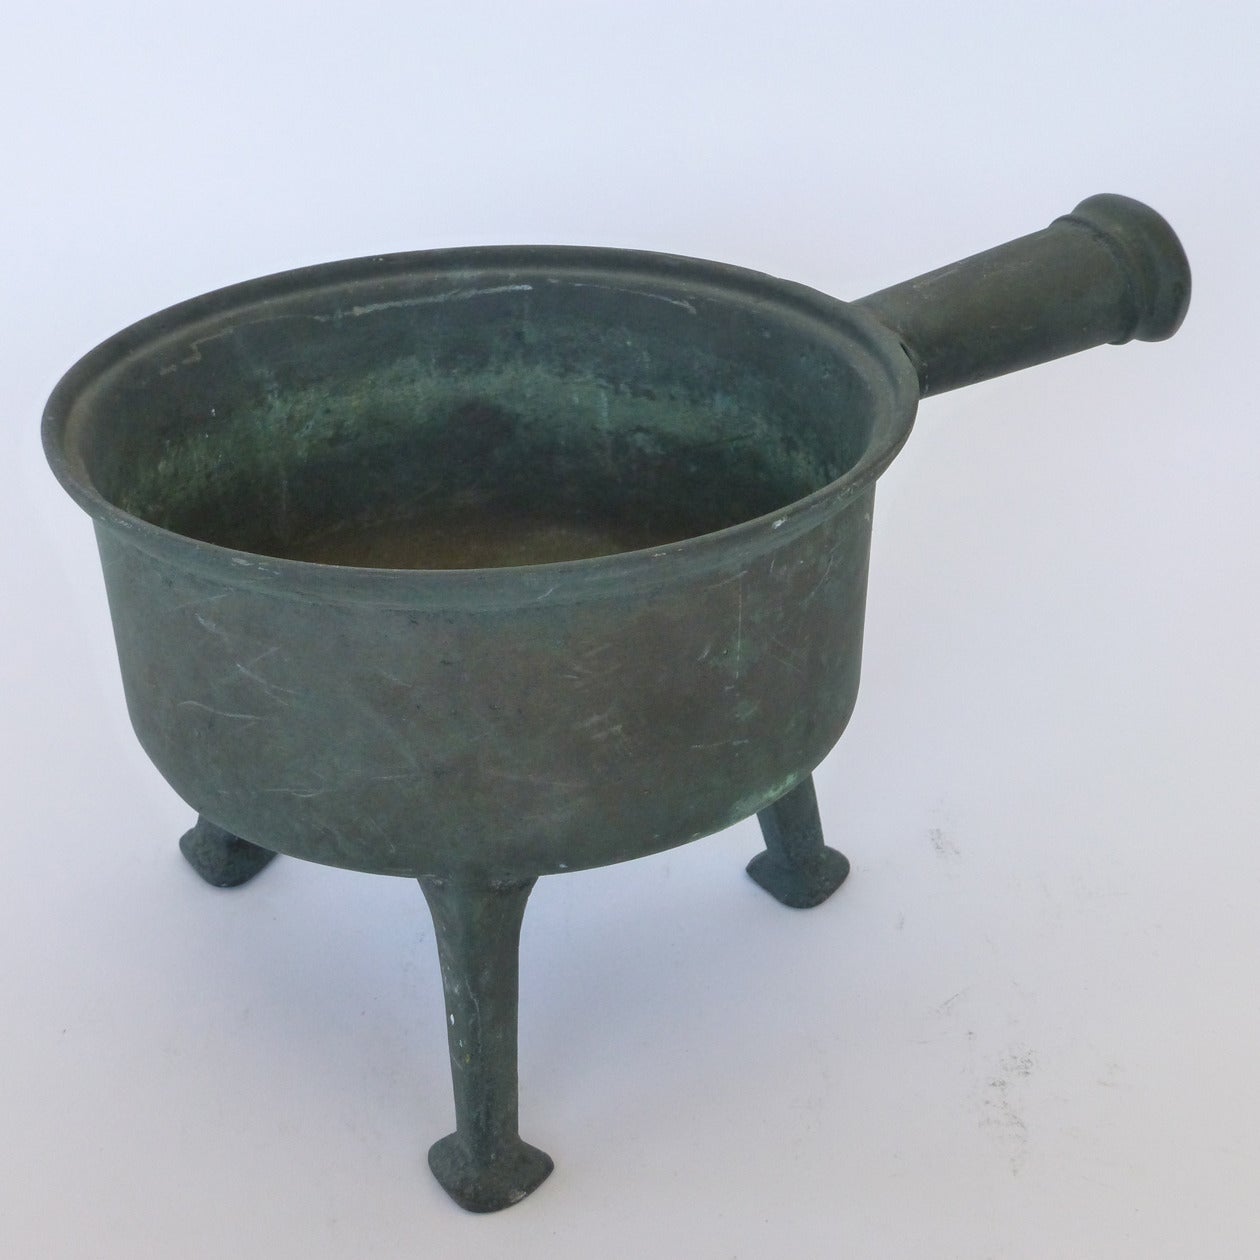 Rare 17th Century German Bronze Posnet Pot In Good Condition For Sale In Ambler, PA